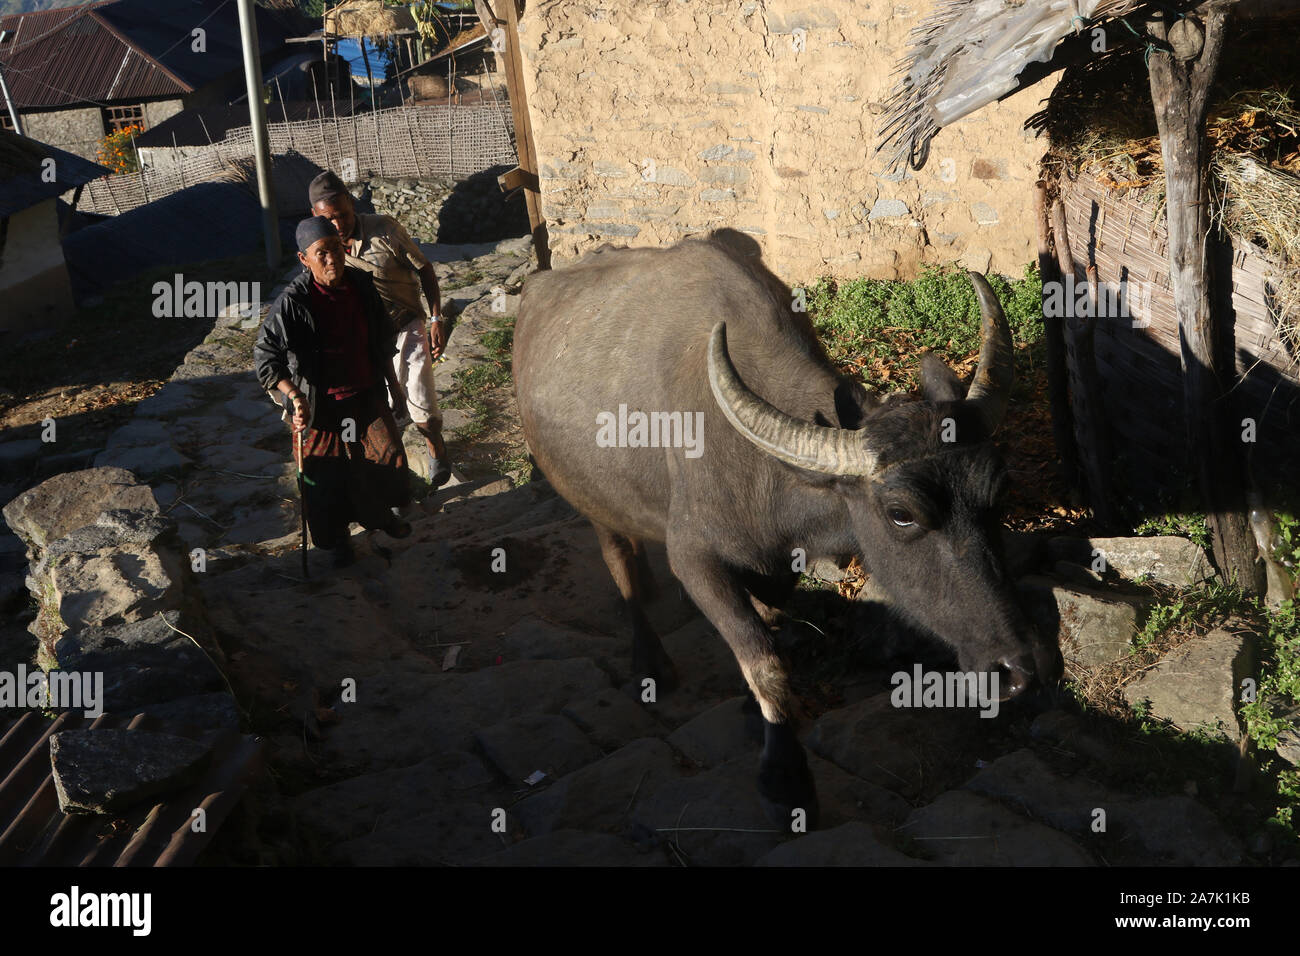 A woman guides an Ox through the village of Sikles, Nepal Stock Photo